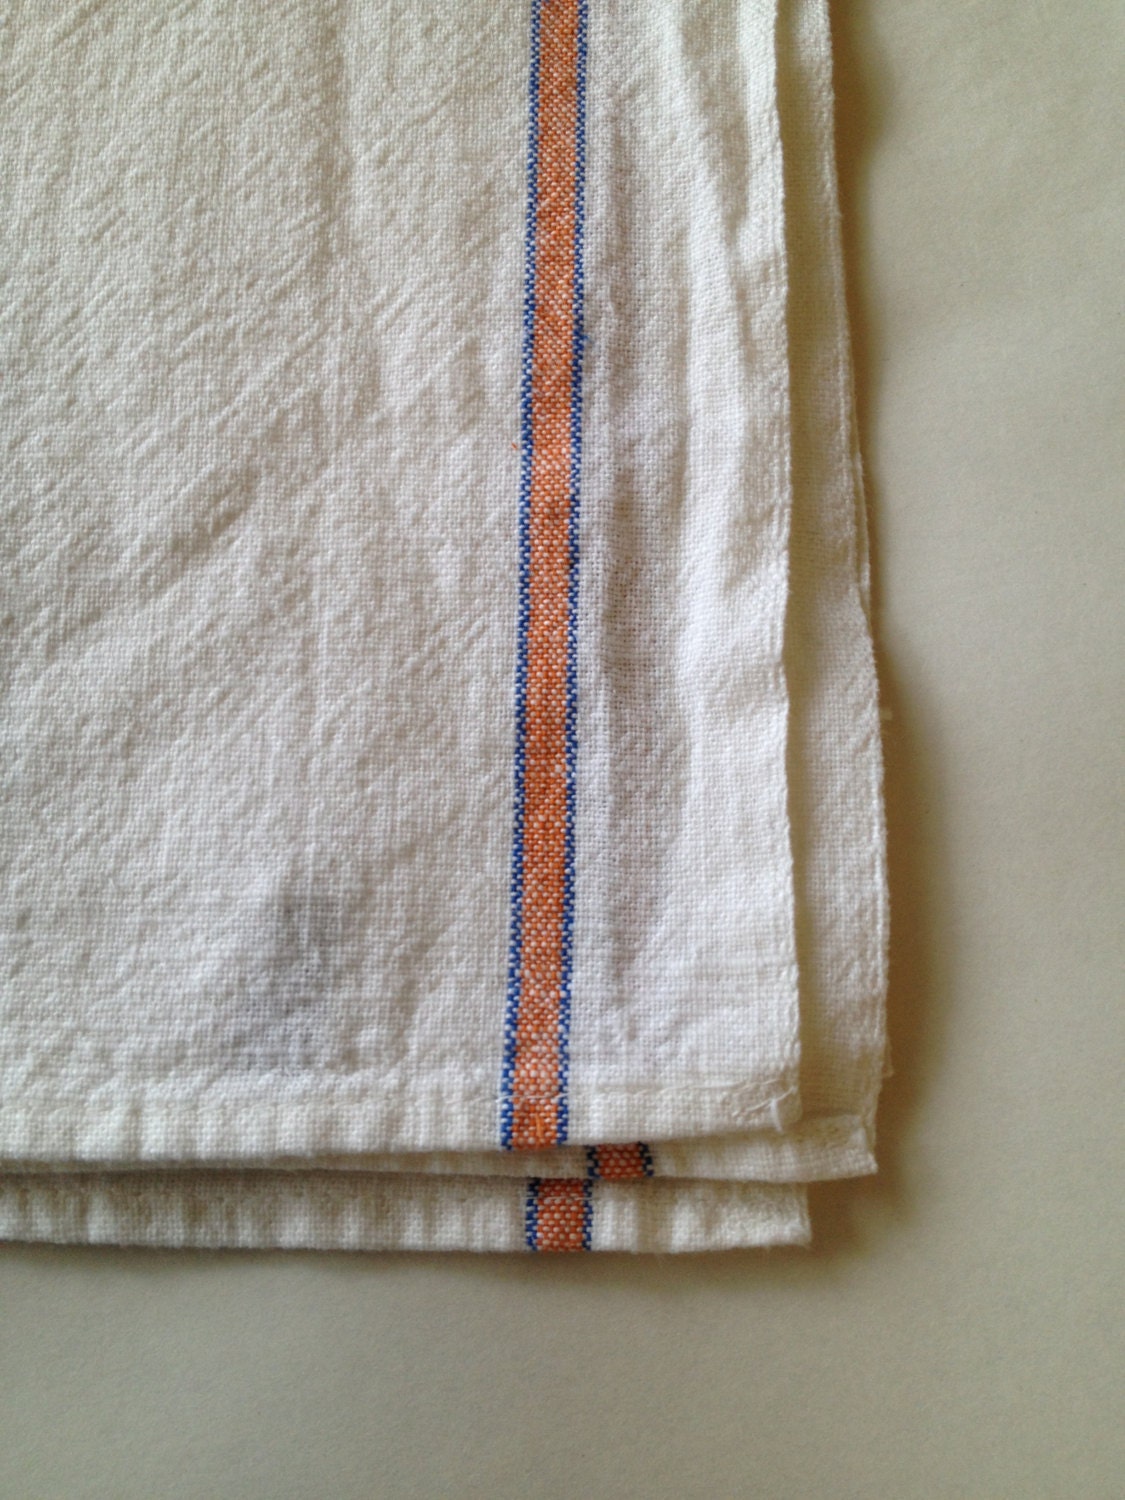 Vintage Cannon Kitchen Towel White with Blue and Orange